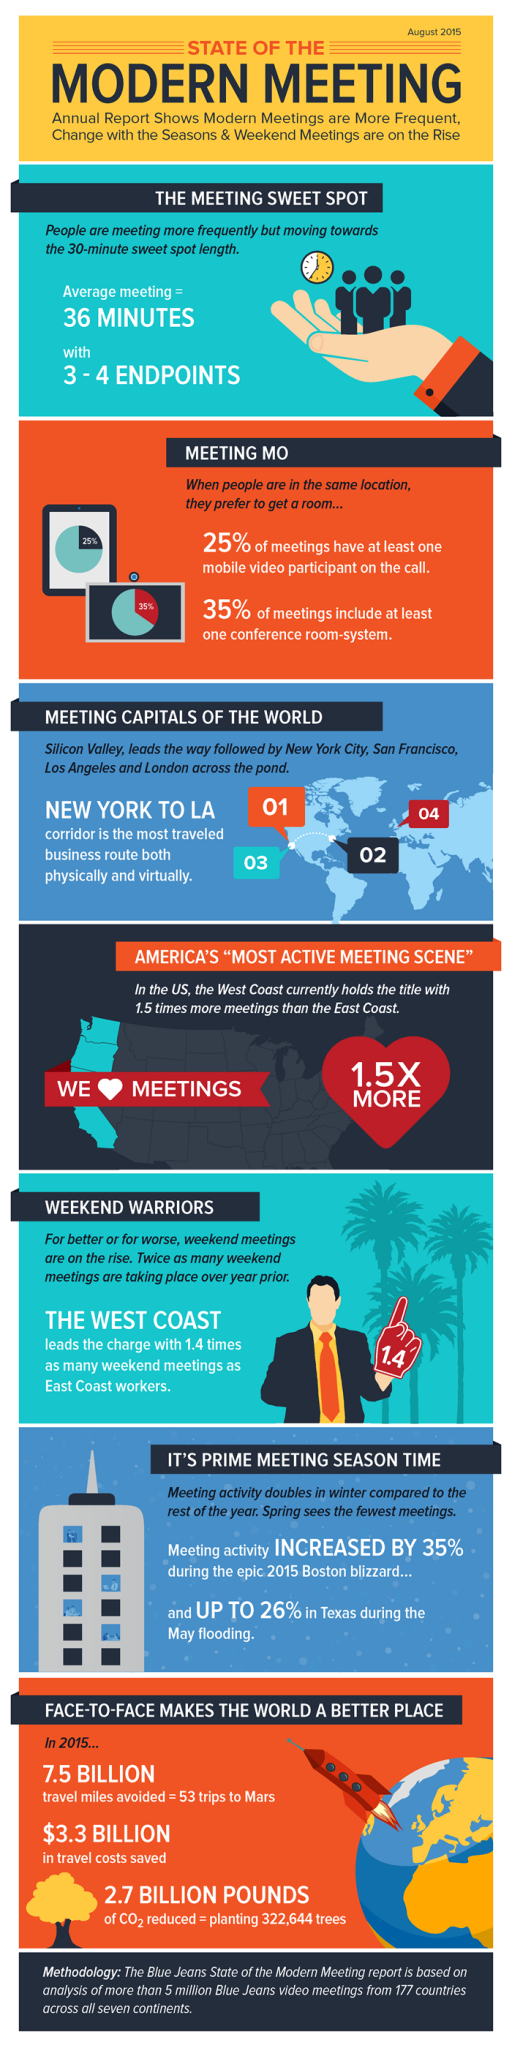 ModernMeeting_Infographic_August2015